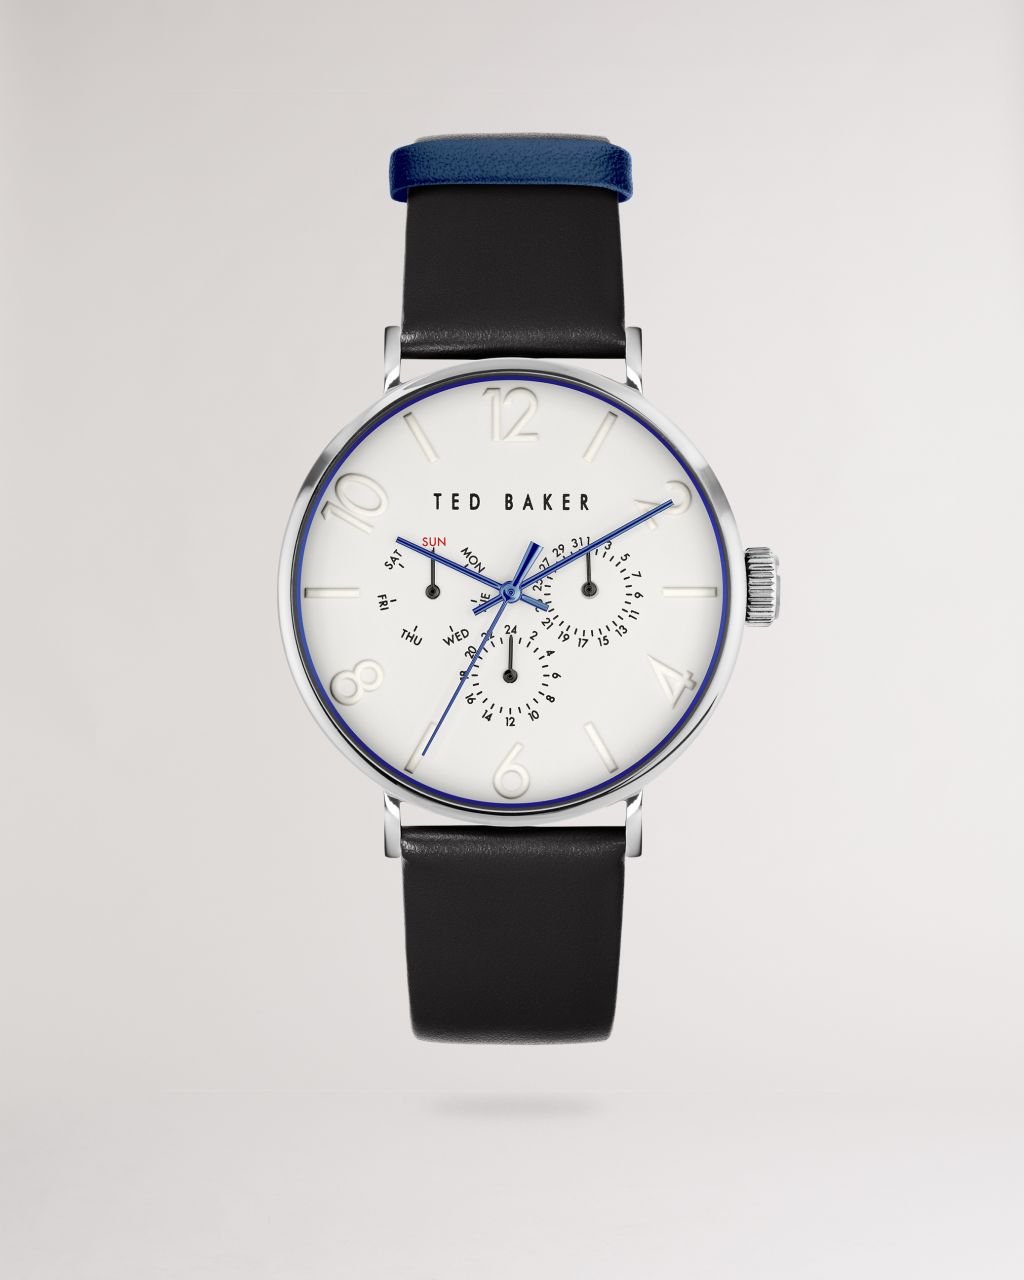 Ted Baker Men's Leather Strap Multifunction Watch in Black, Magnt